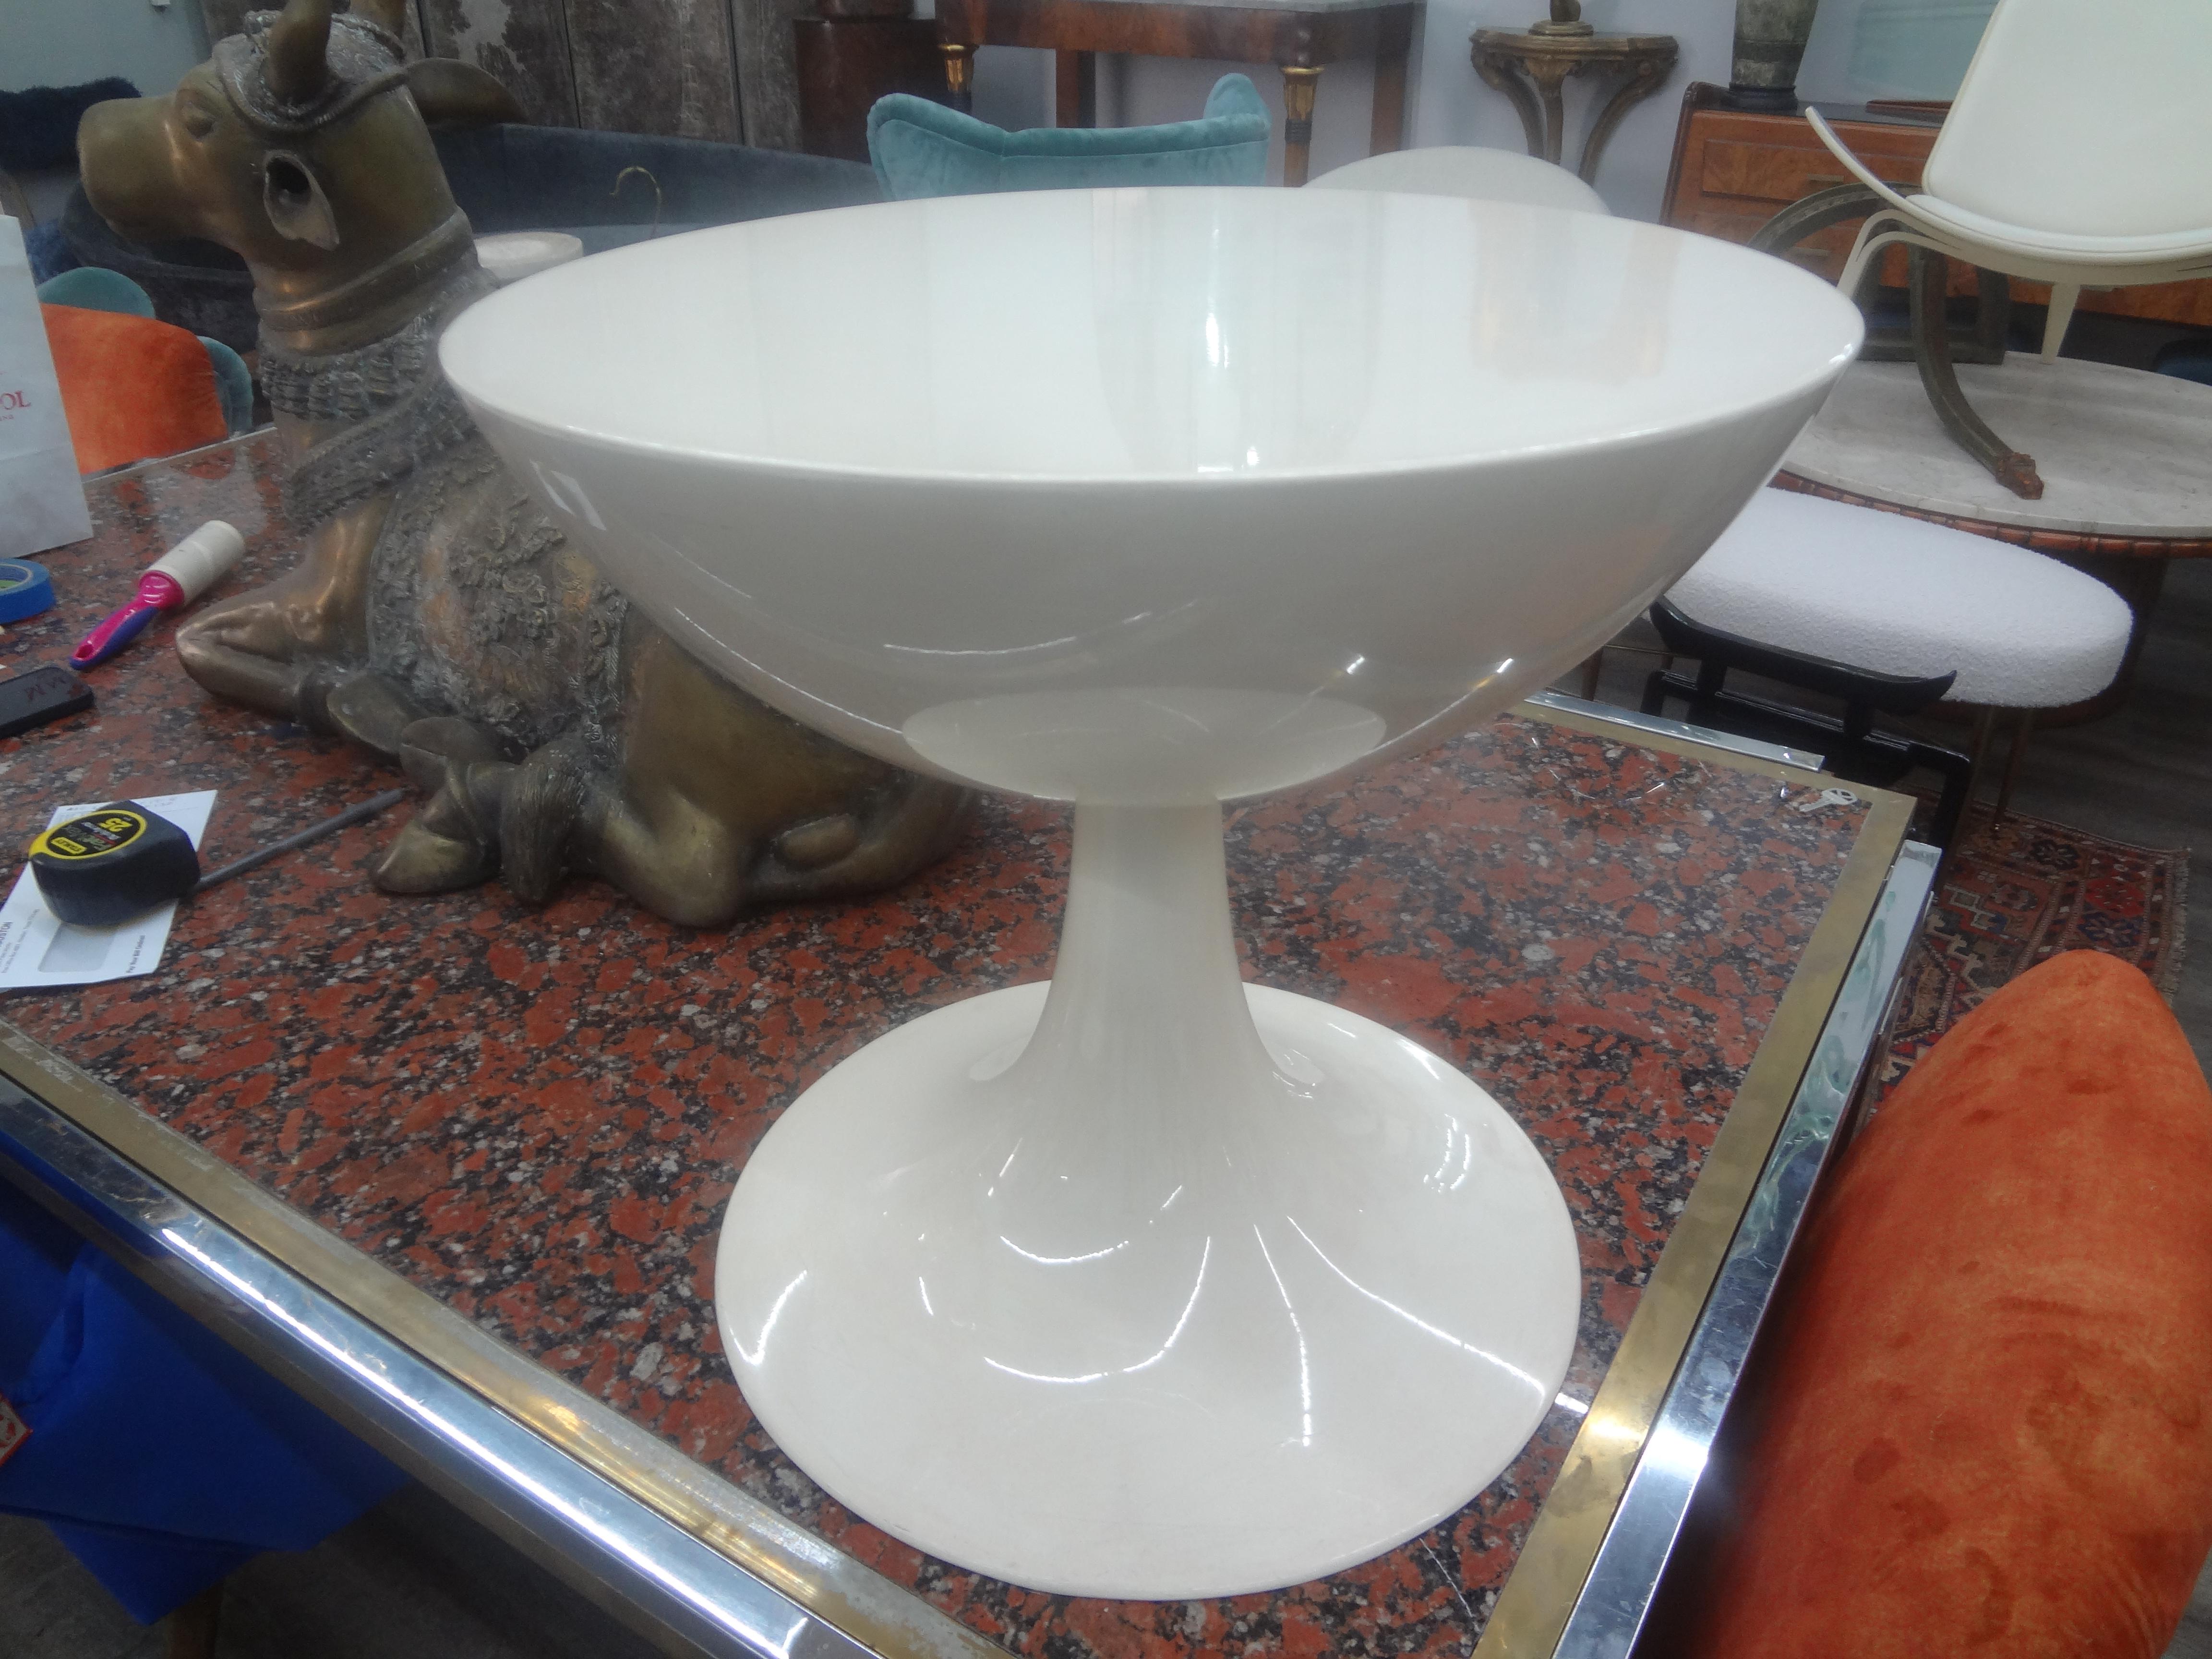 Danish Modern Fiberglass Tulip Table By Oddense Maskinsnedkeri.
Our stunning Modernist tulip table will work well in a mid century modern or contemporary setting. In good vintage condition with original label!
The perfect side table!